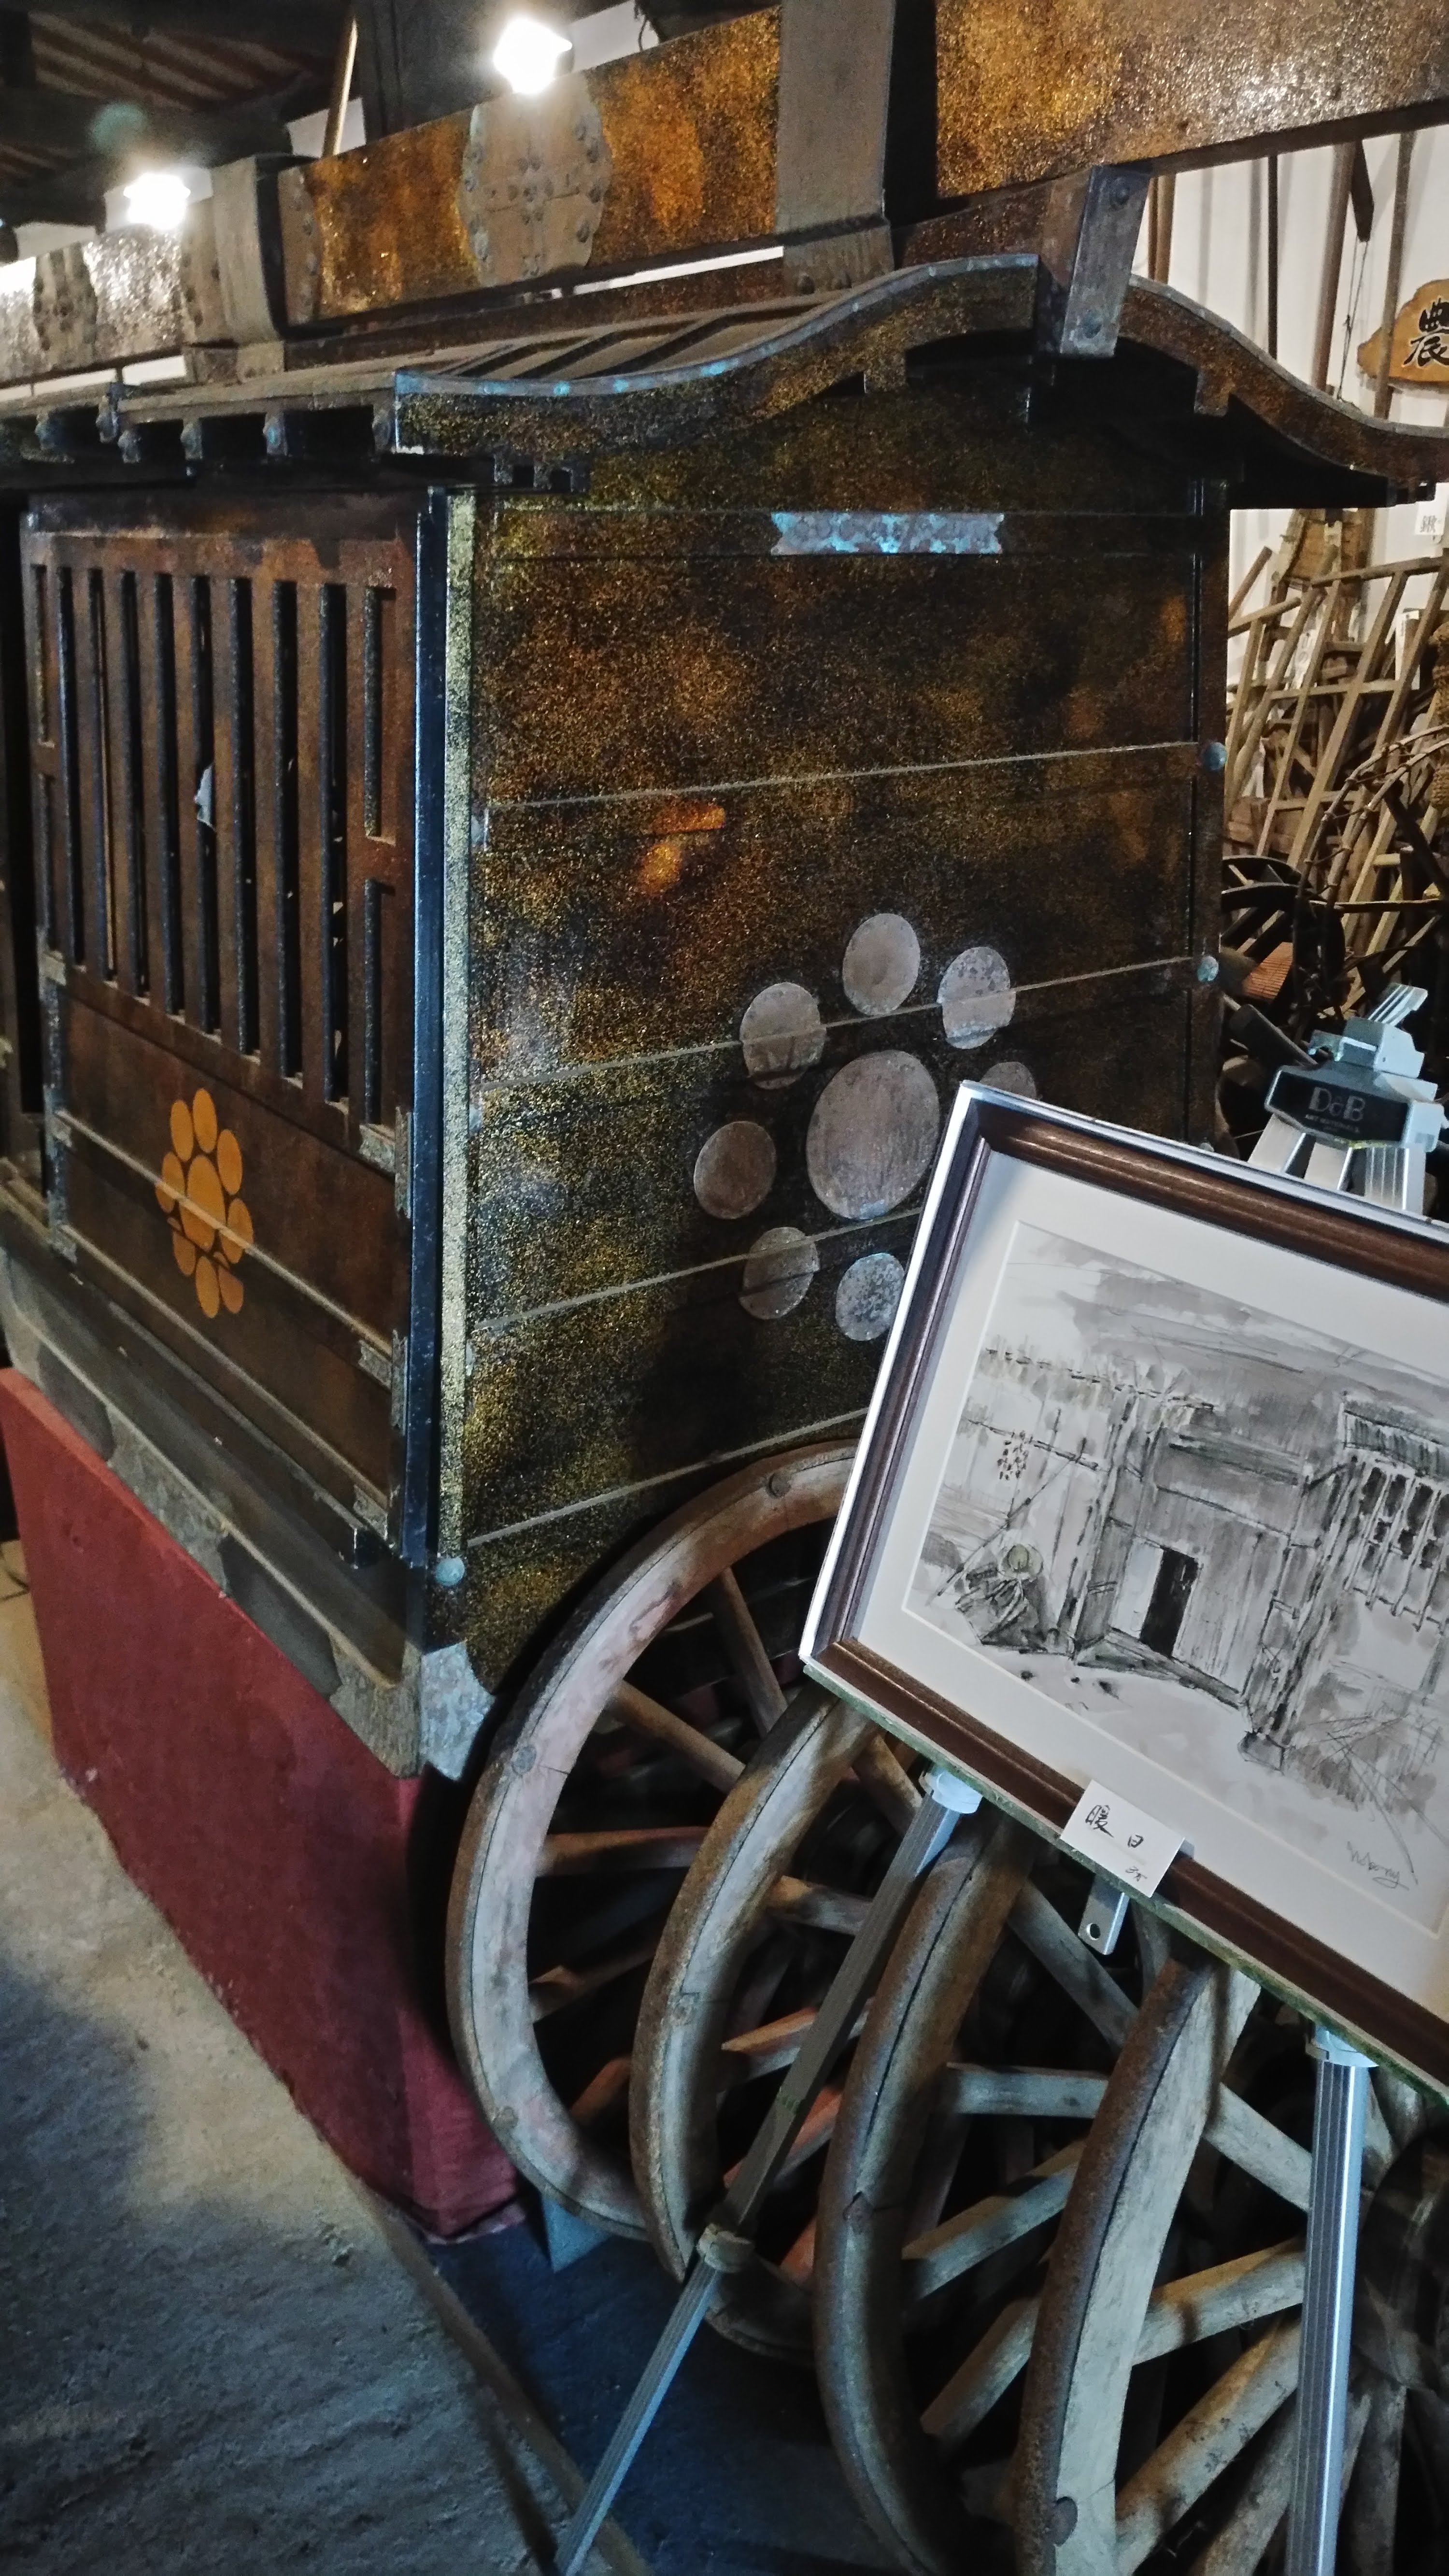 a wooden cart with wooden wheels leaning against it next to a framed black and white painting on a stand